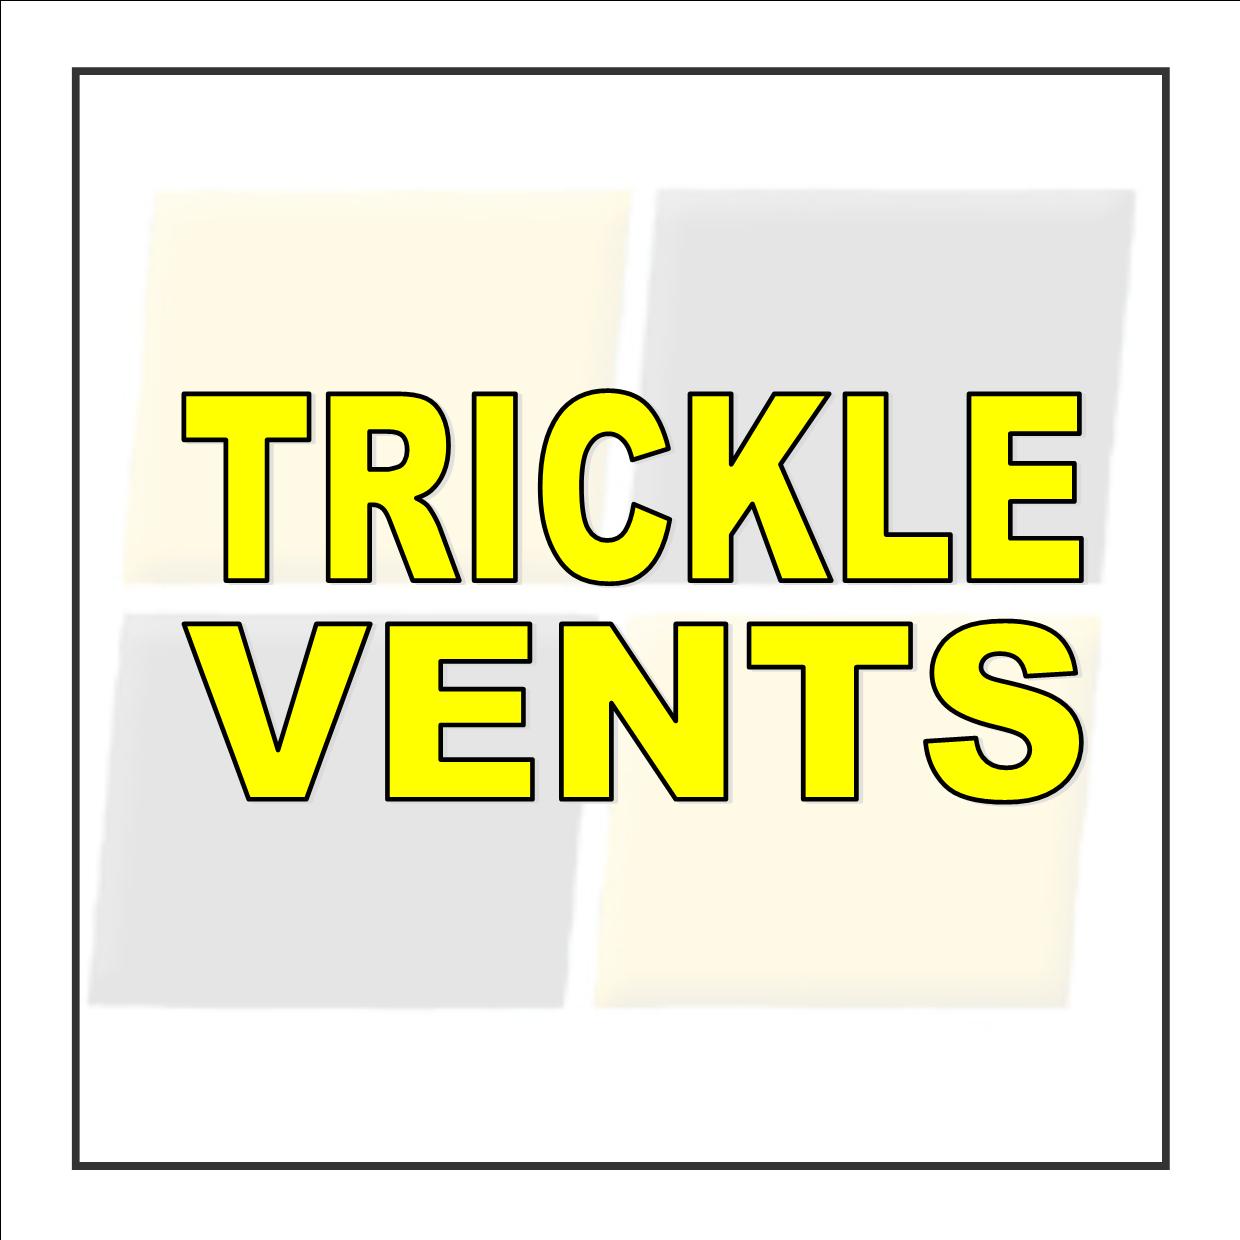 Trickle Vents